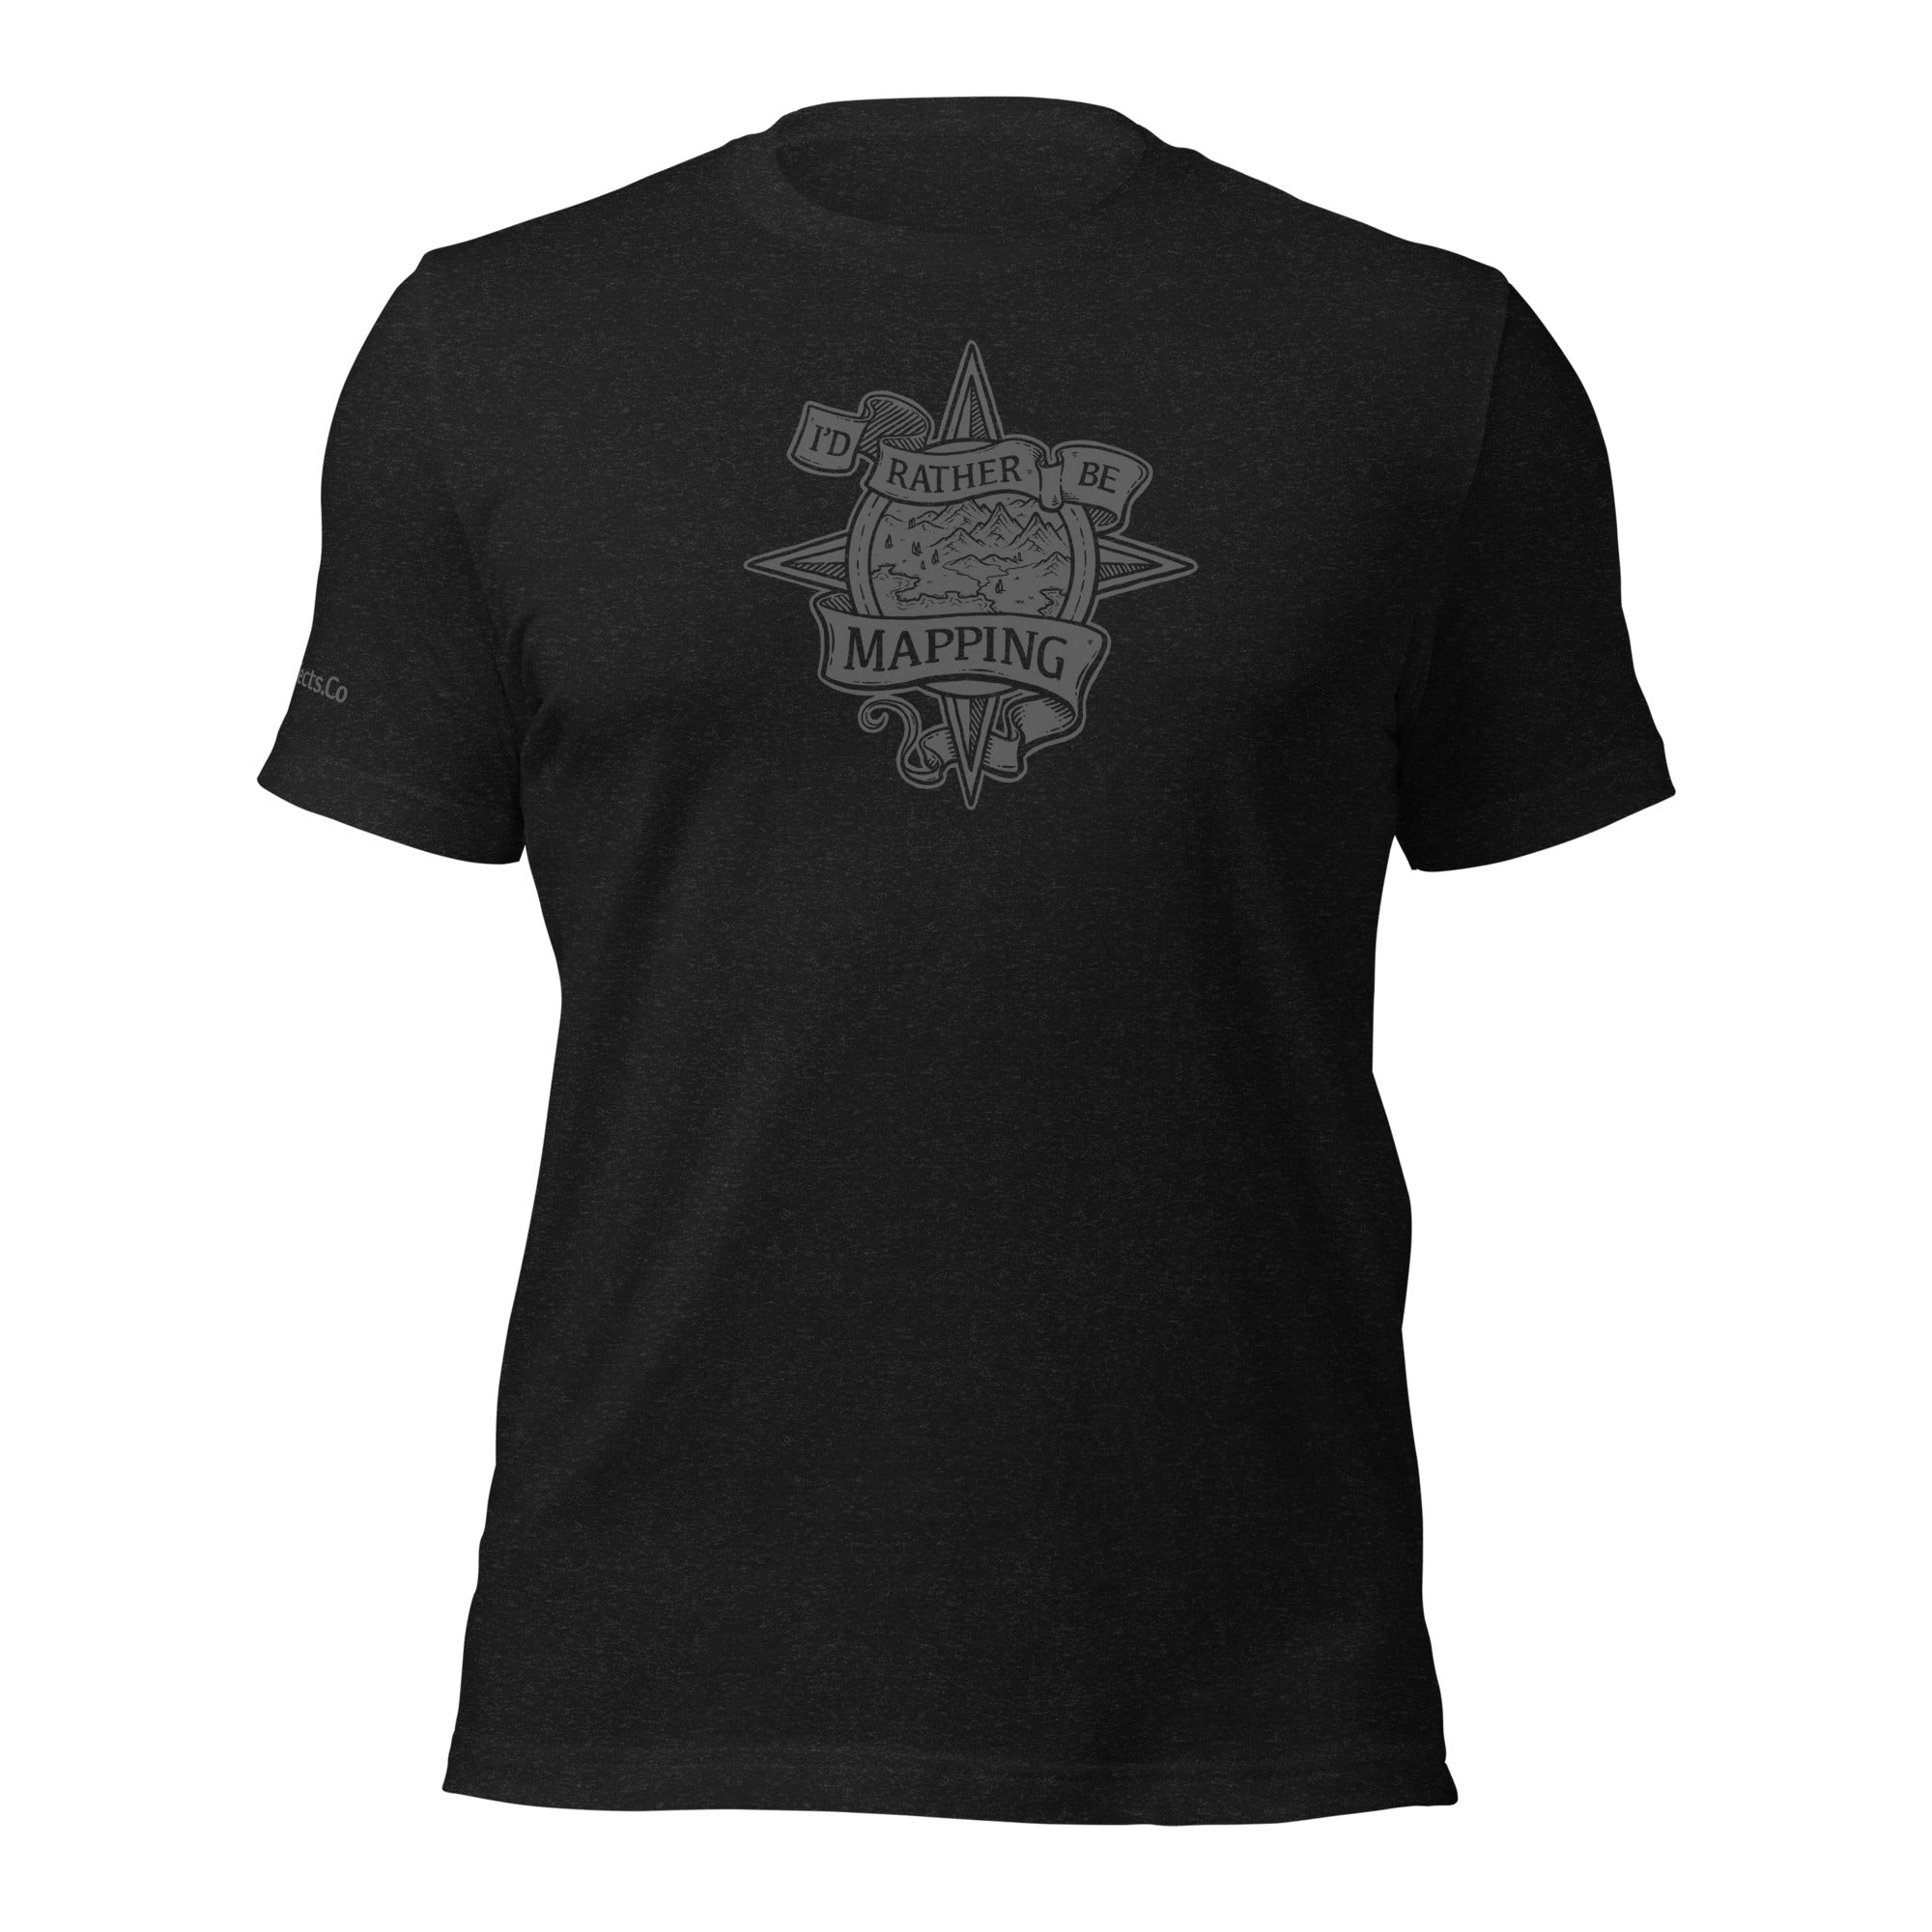 I’d Rather Be Mapping - Black T-Shirt